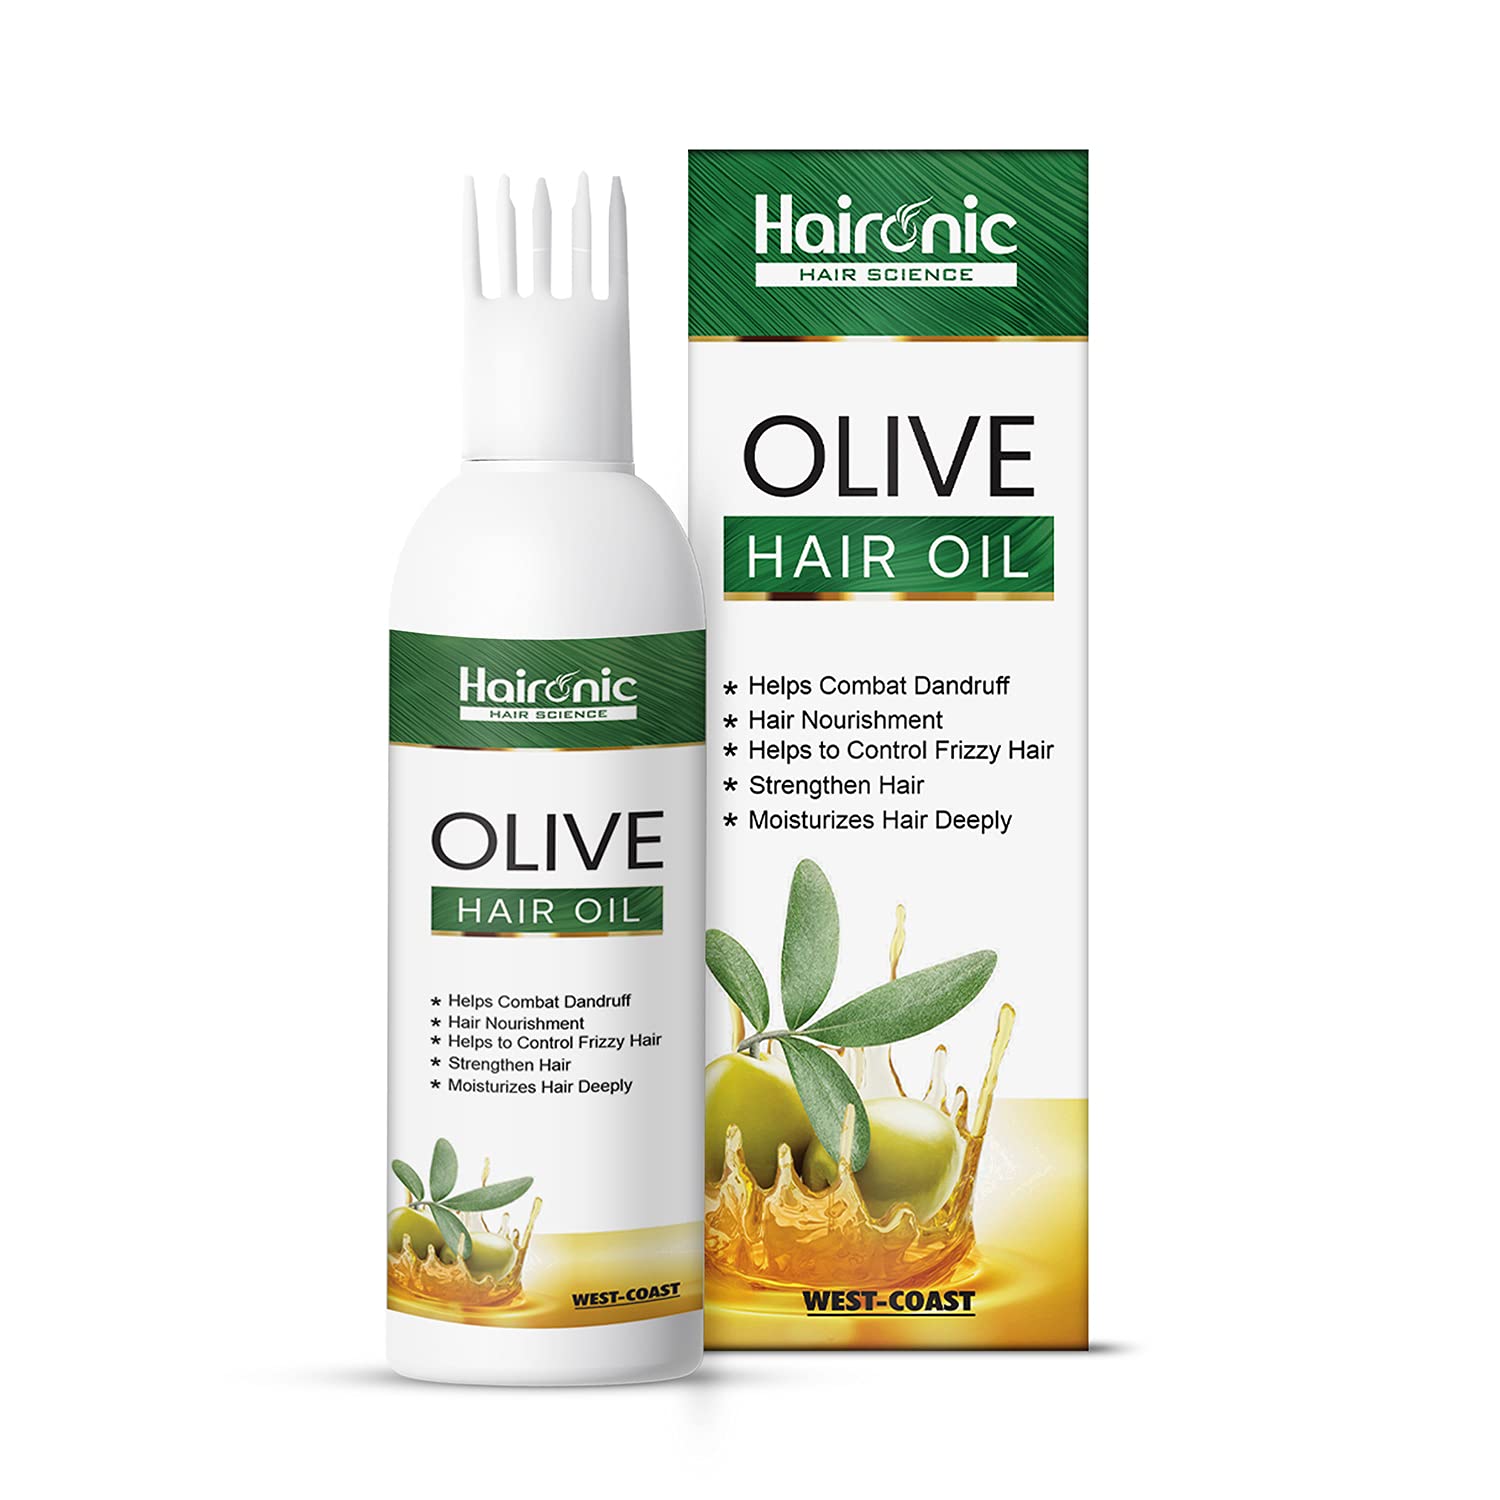 Haironic Hair Science Olive Hair Oil | Helps Combat Dandruff, Smooth Dry Hair, Reduces Hair Fall & Reduces Hair Breakage - 100ml